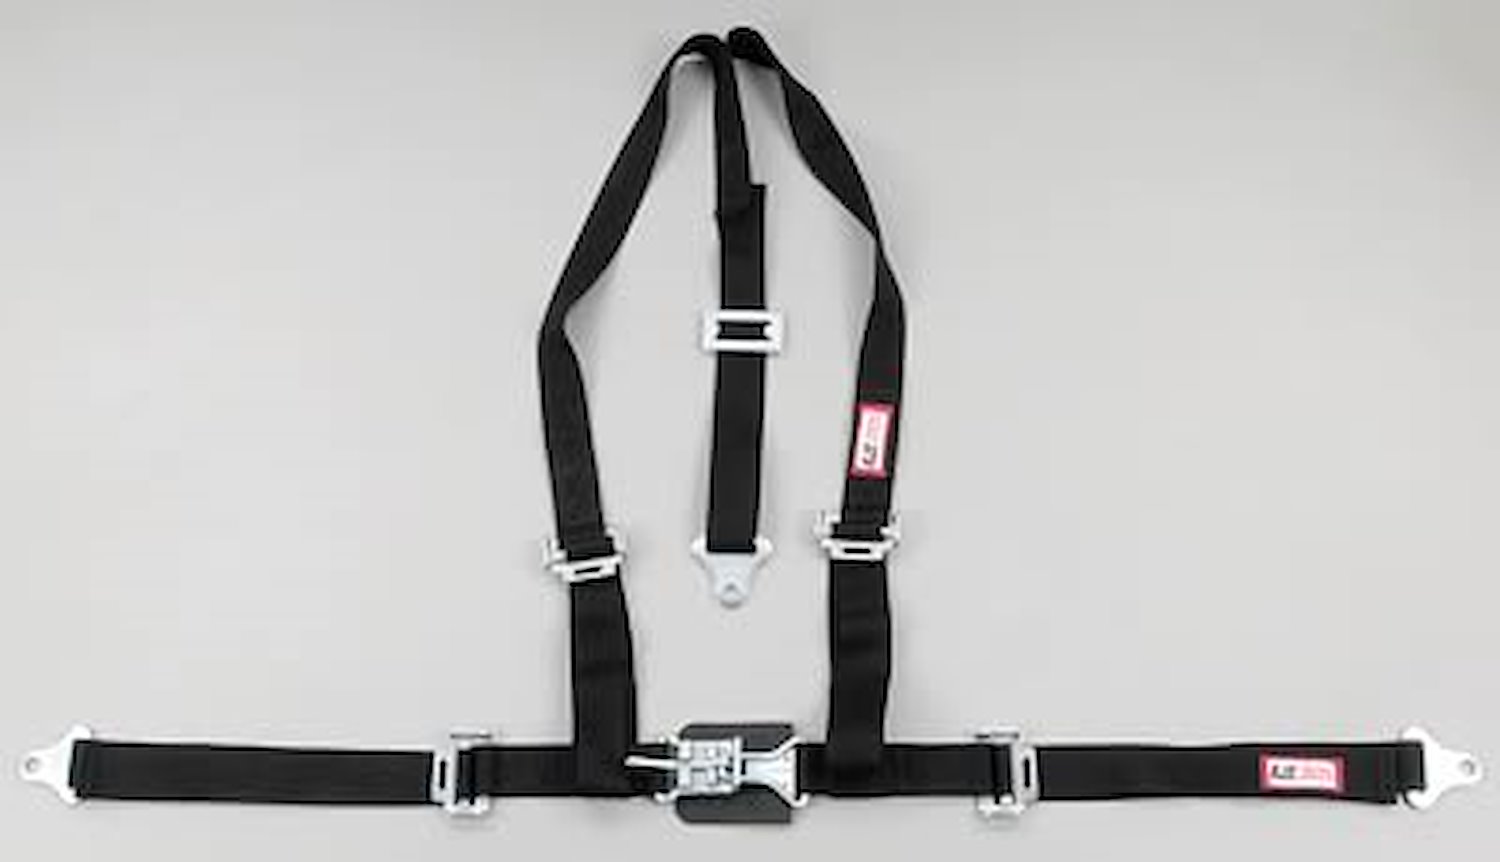 NON-SFI L&L HARNESS 2 PULL DOWN Lap Belt SEWN IN 2 S.H. Y FLOOR Mount ALL WRAP ENDS BLACK